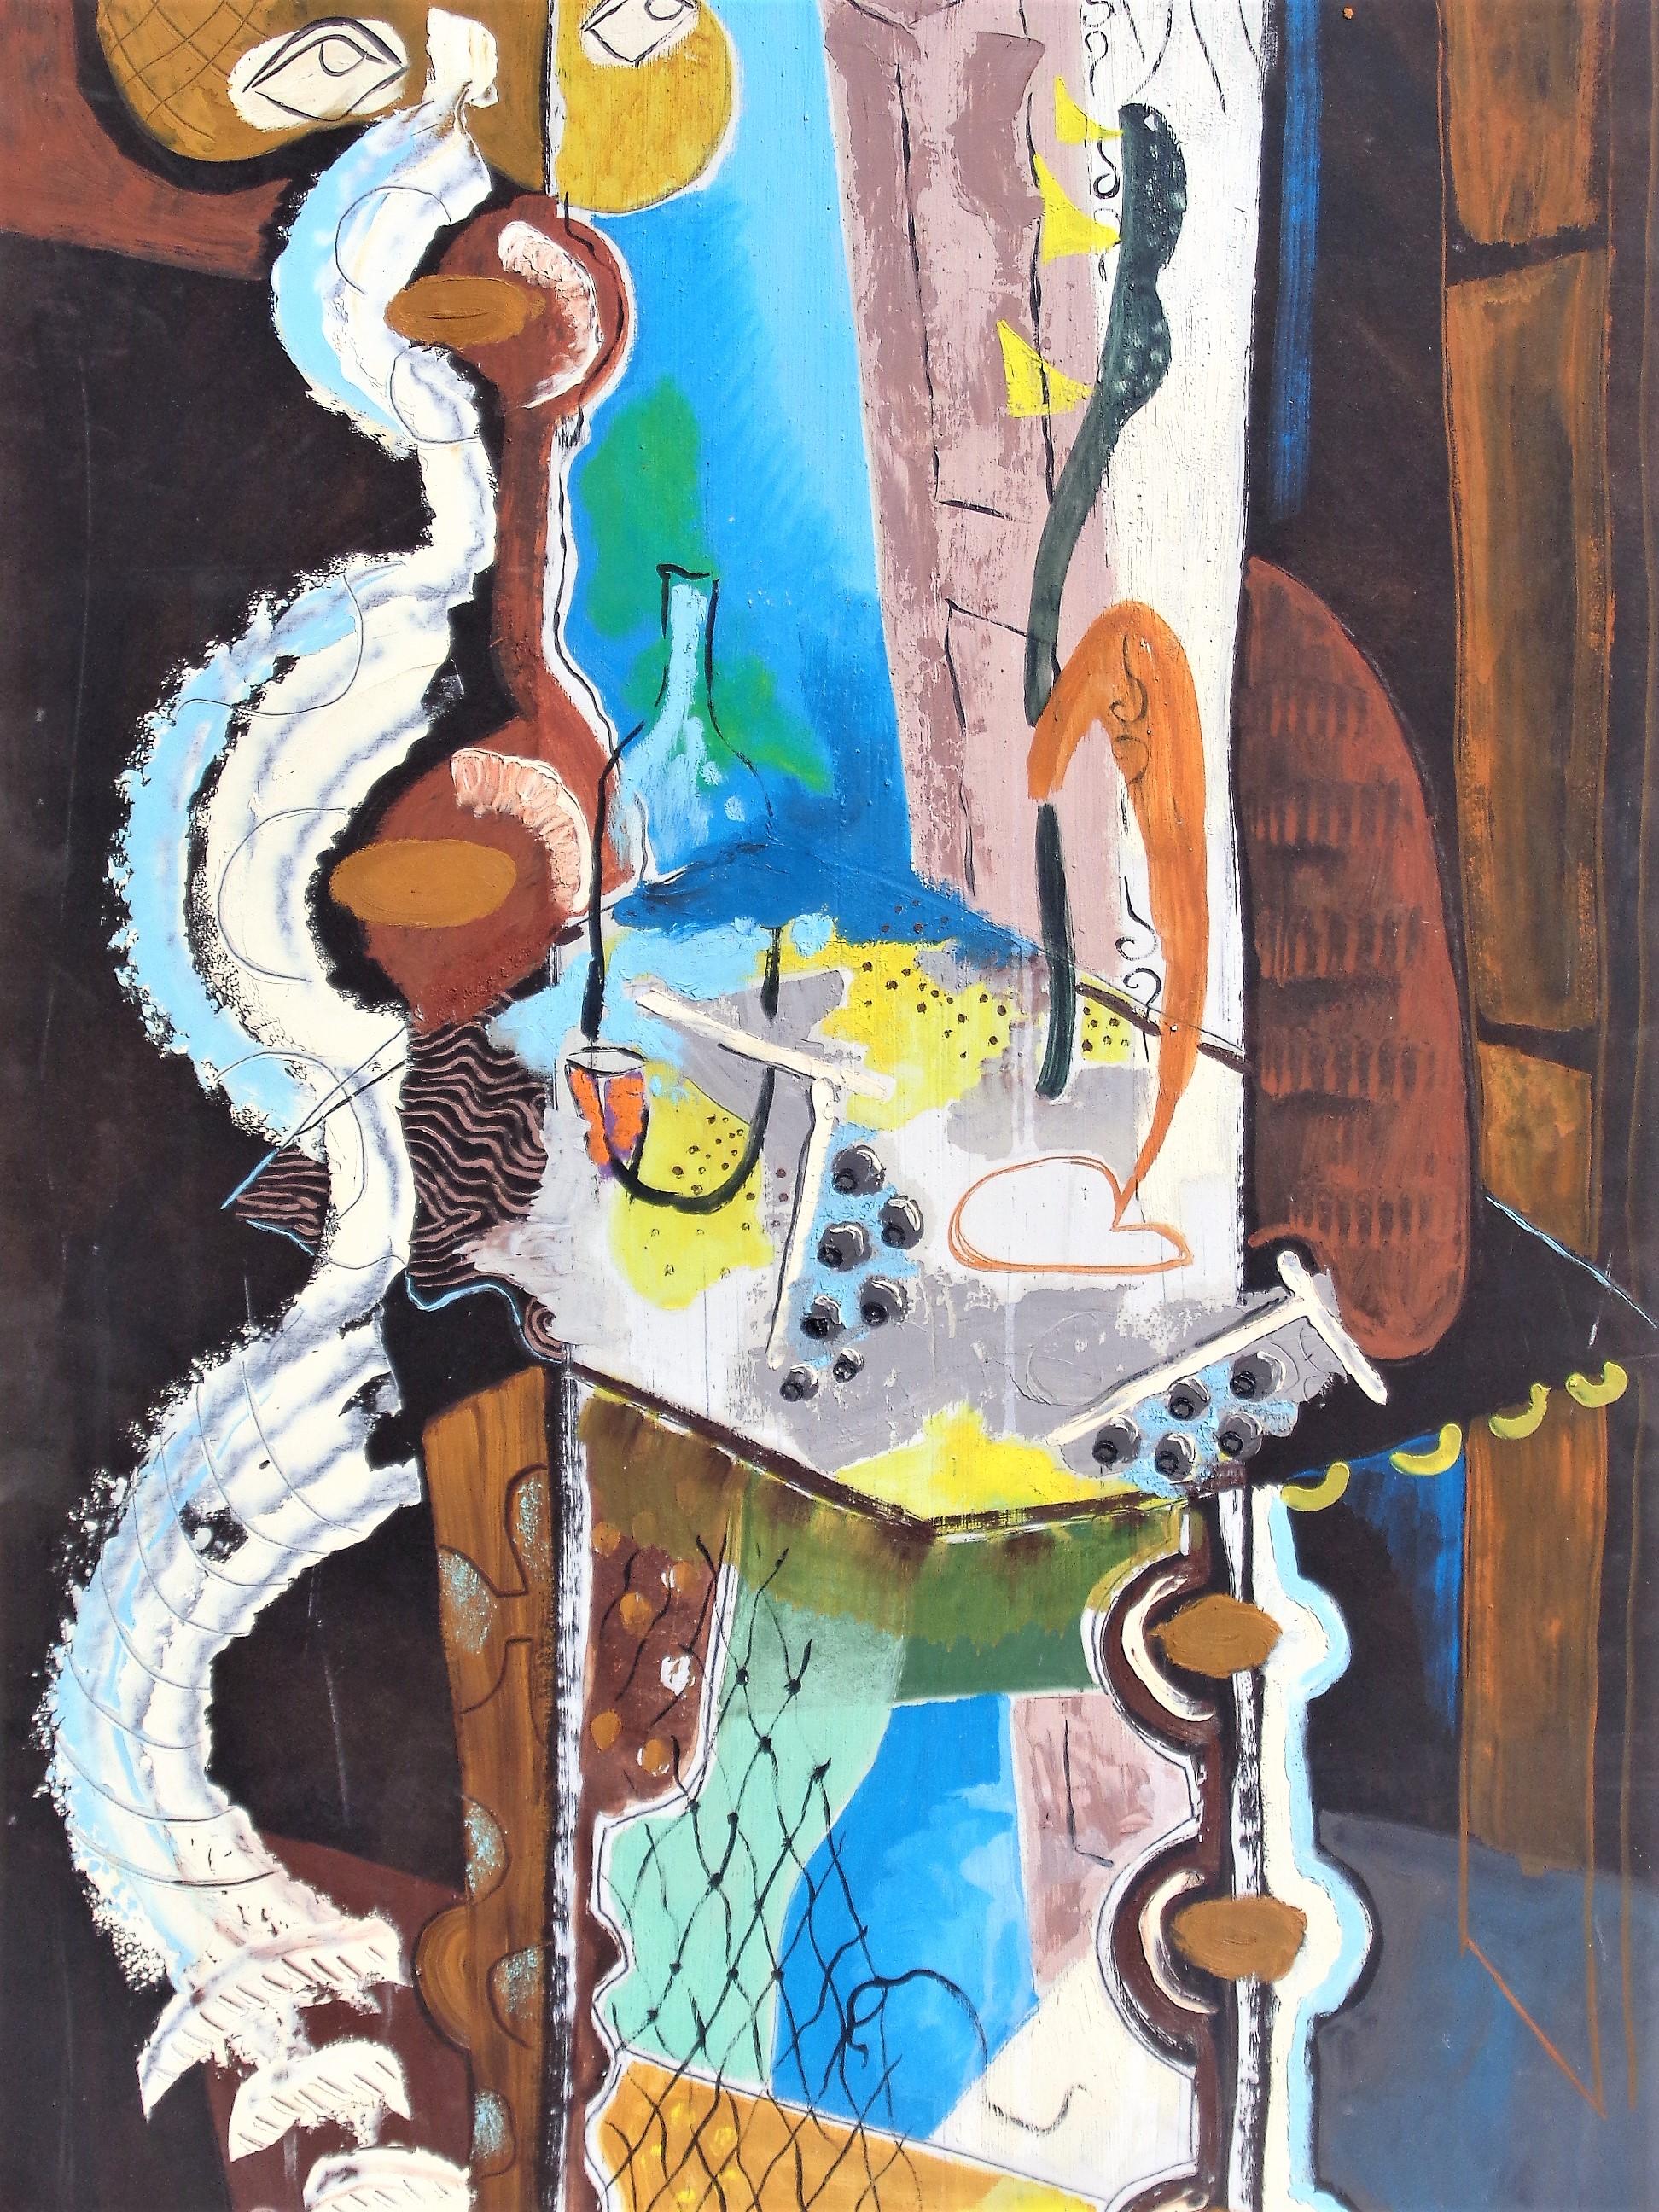 Hand-Painted American Modernist Abstract Oil Painting Interior Scene w/ Figure, Zoute' 1947